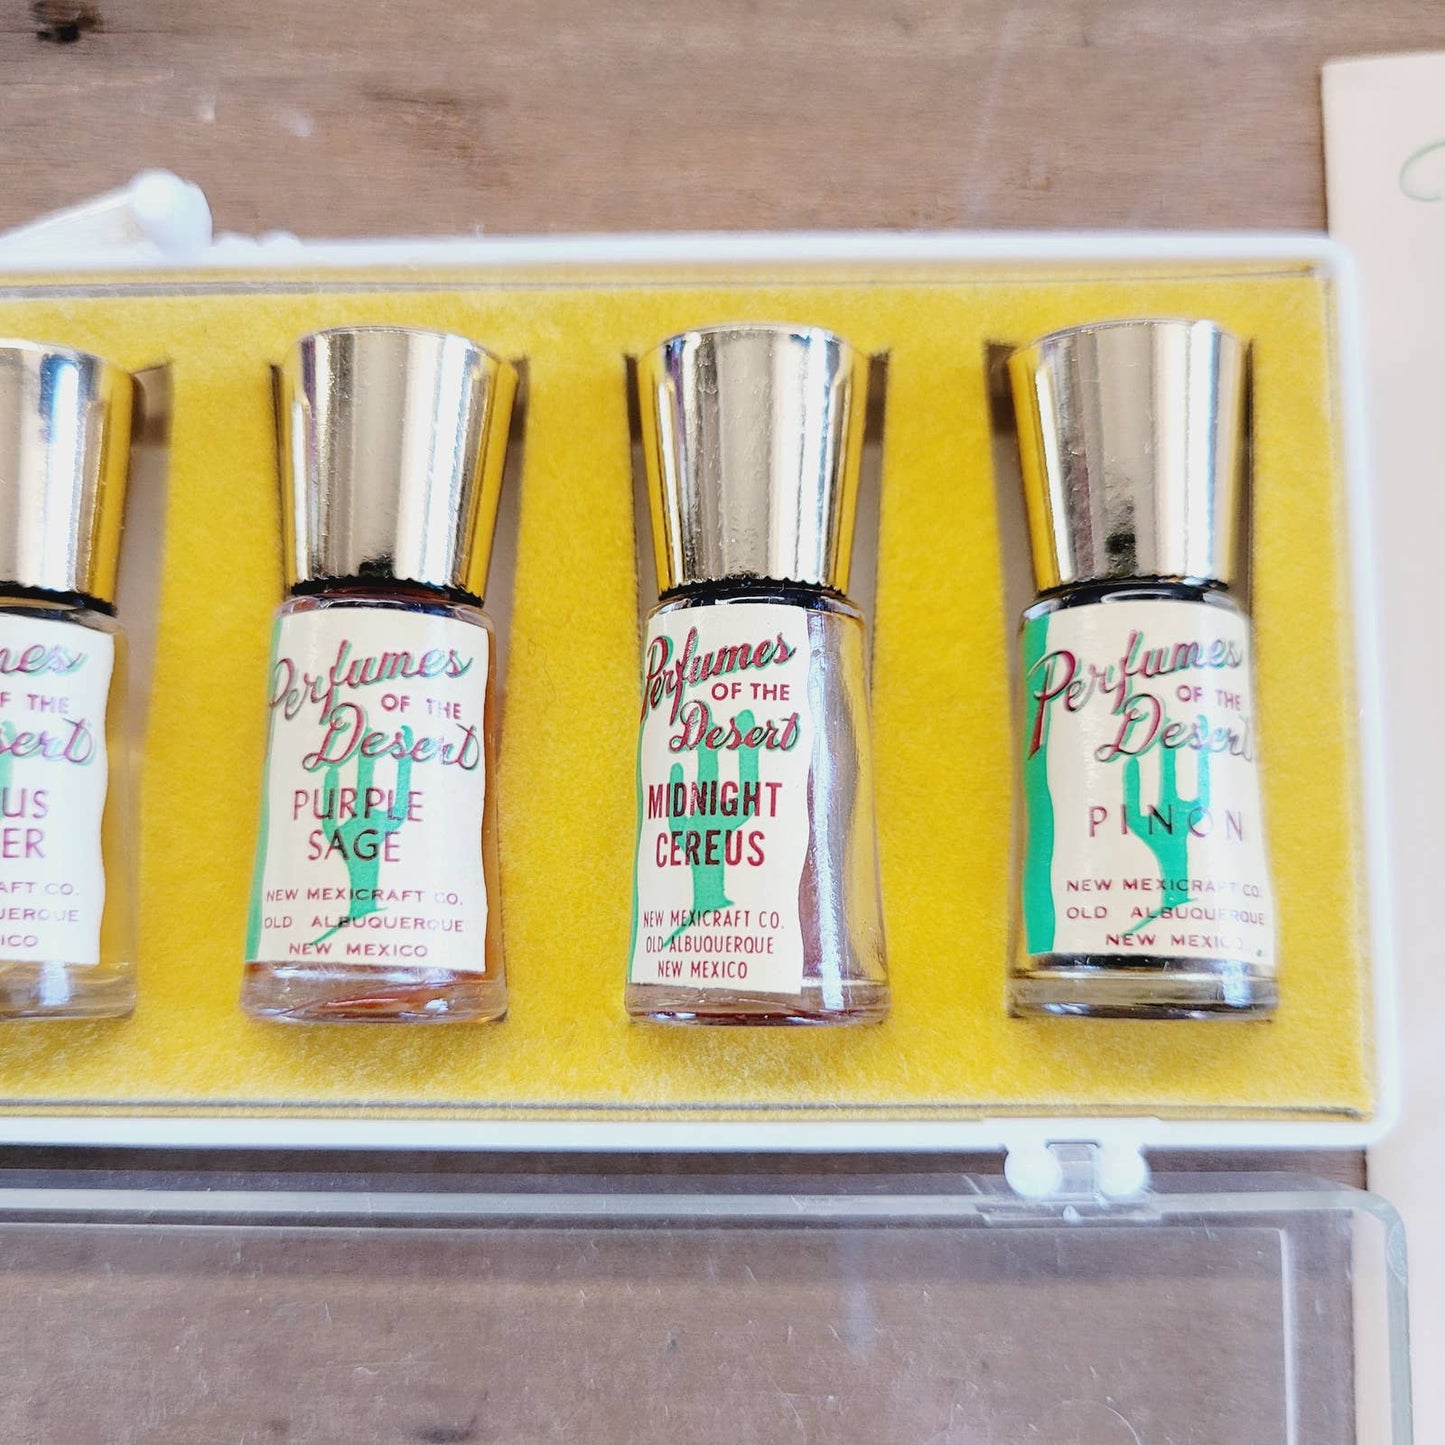 Vintage New Mexicraft Co Perfumes of the Desert 6 in Box